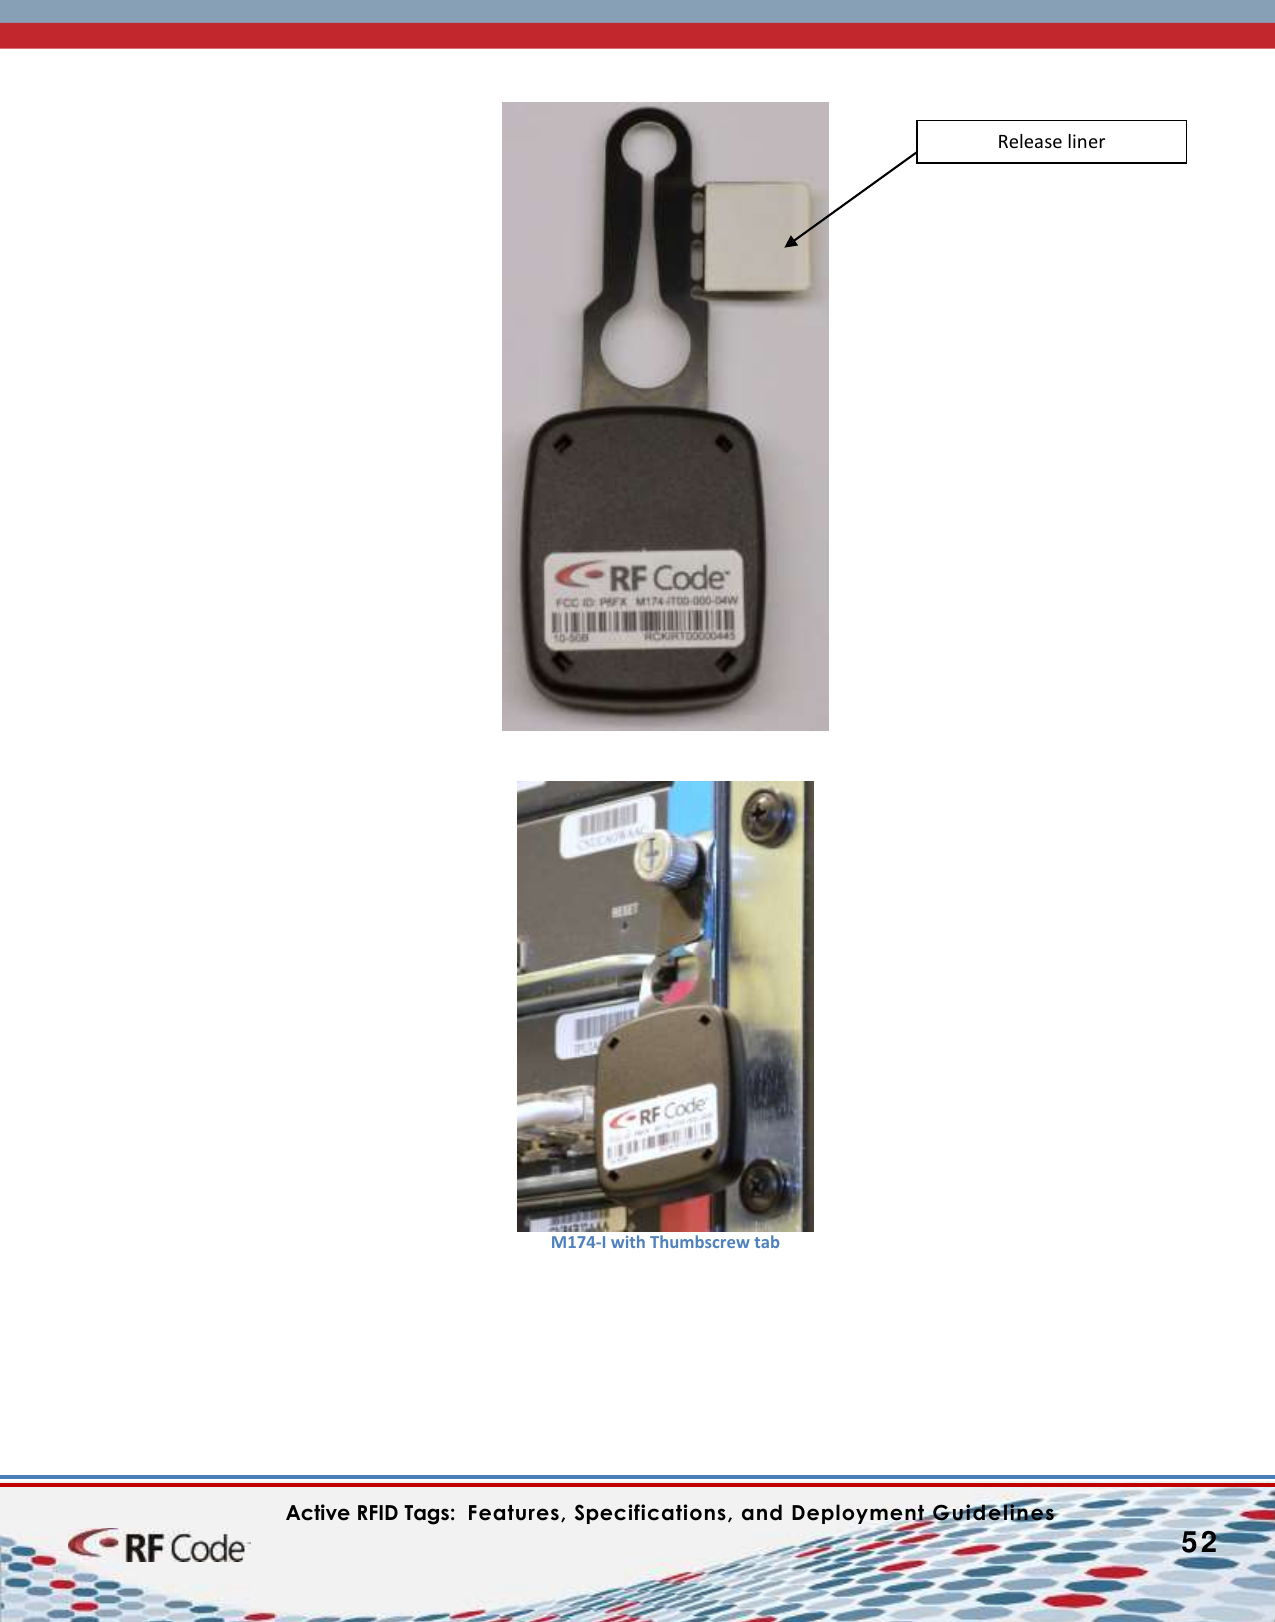    Active RFID Tags:  Features, Specifications, and Deployment Guidelines           52            M174-I with Thumbscrew tab       Release liner 